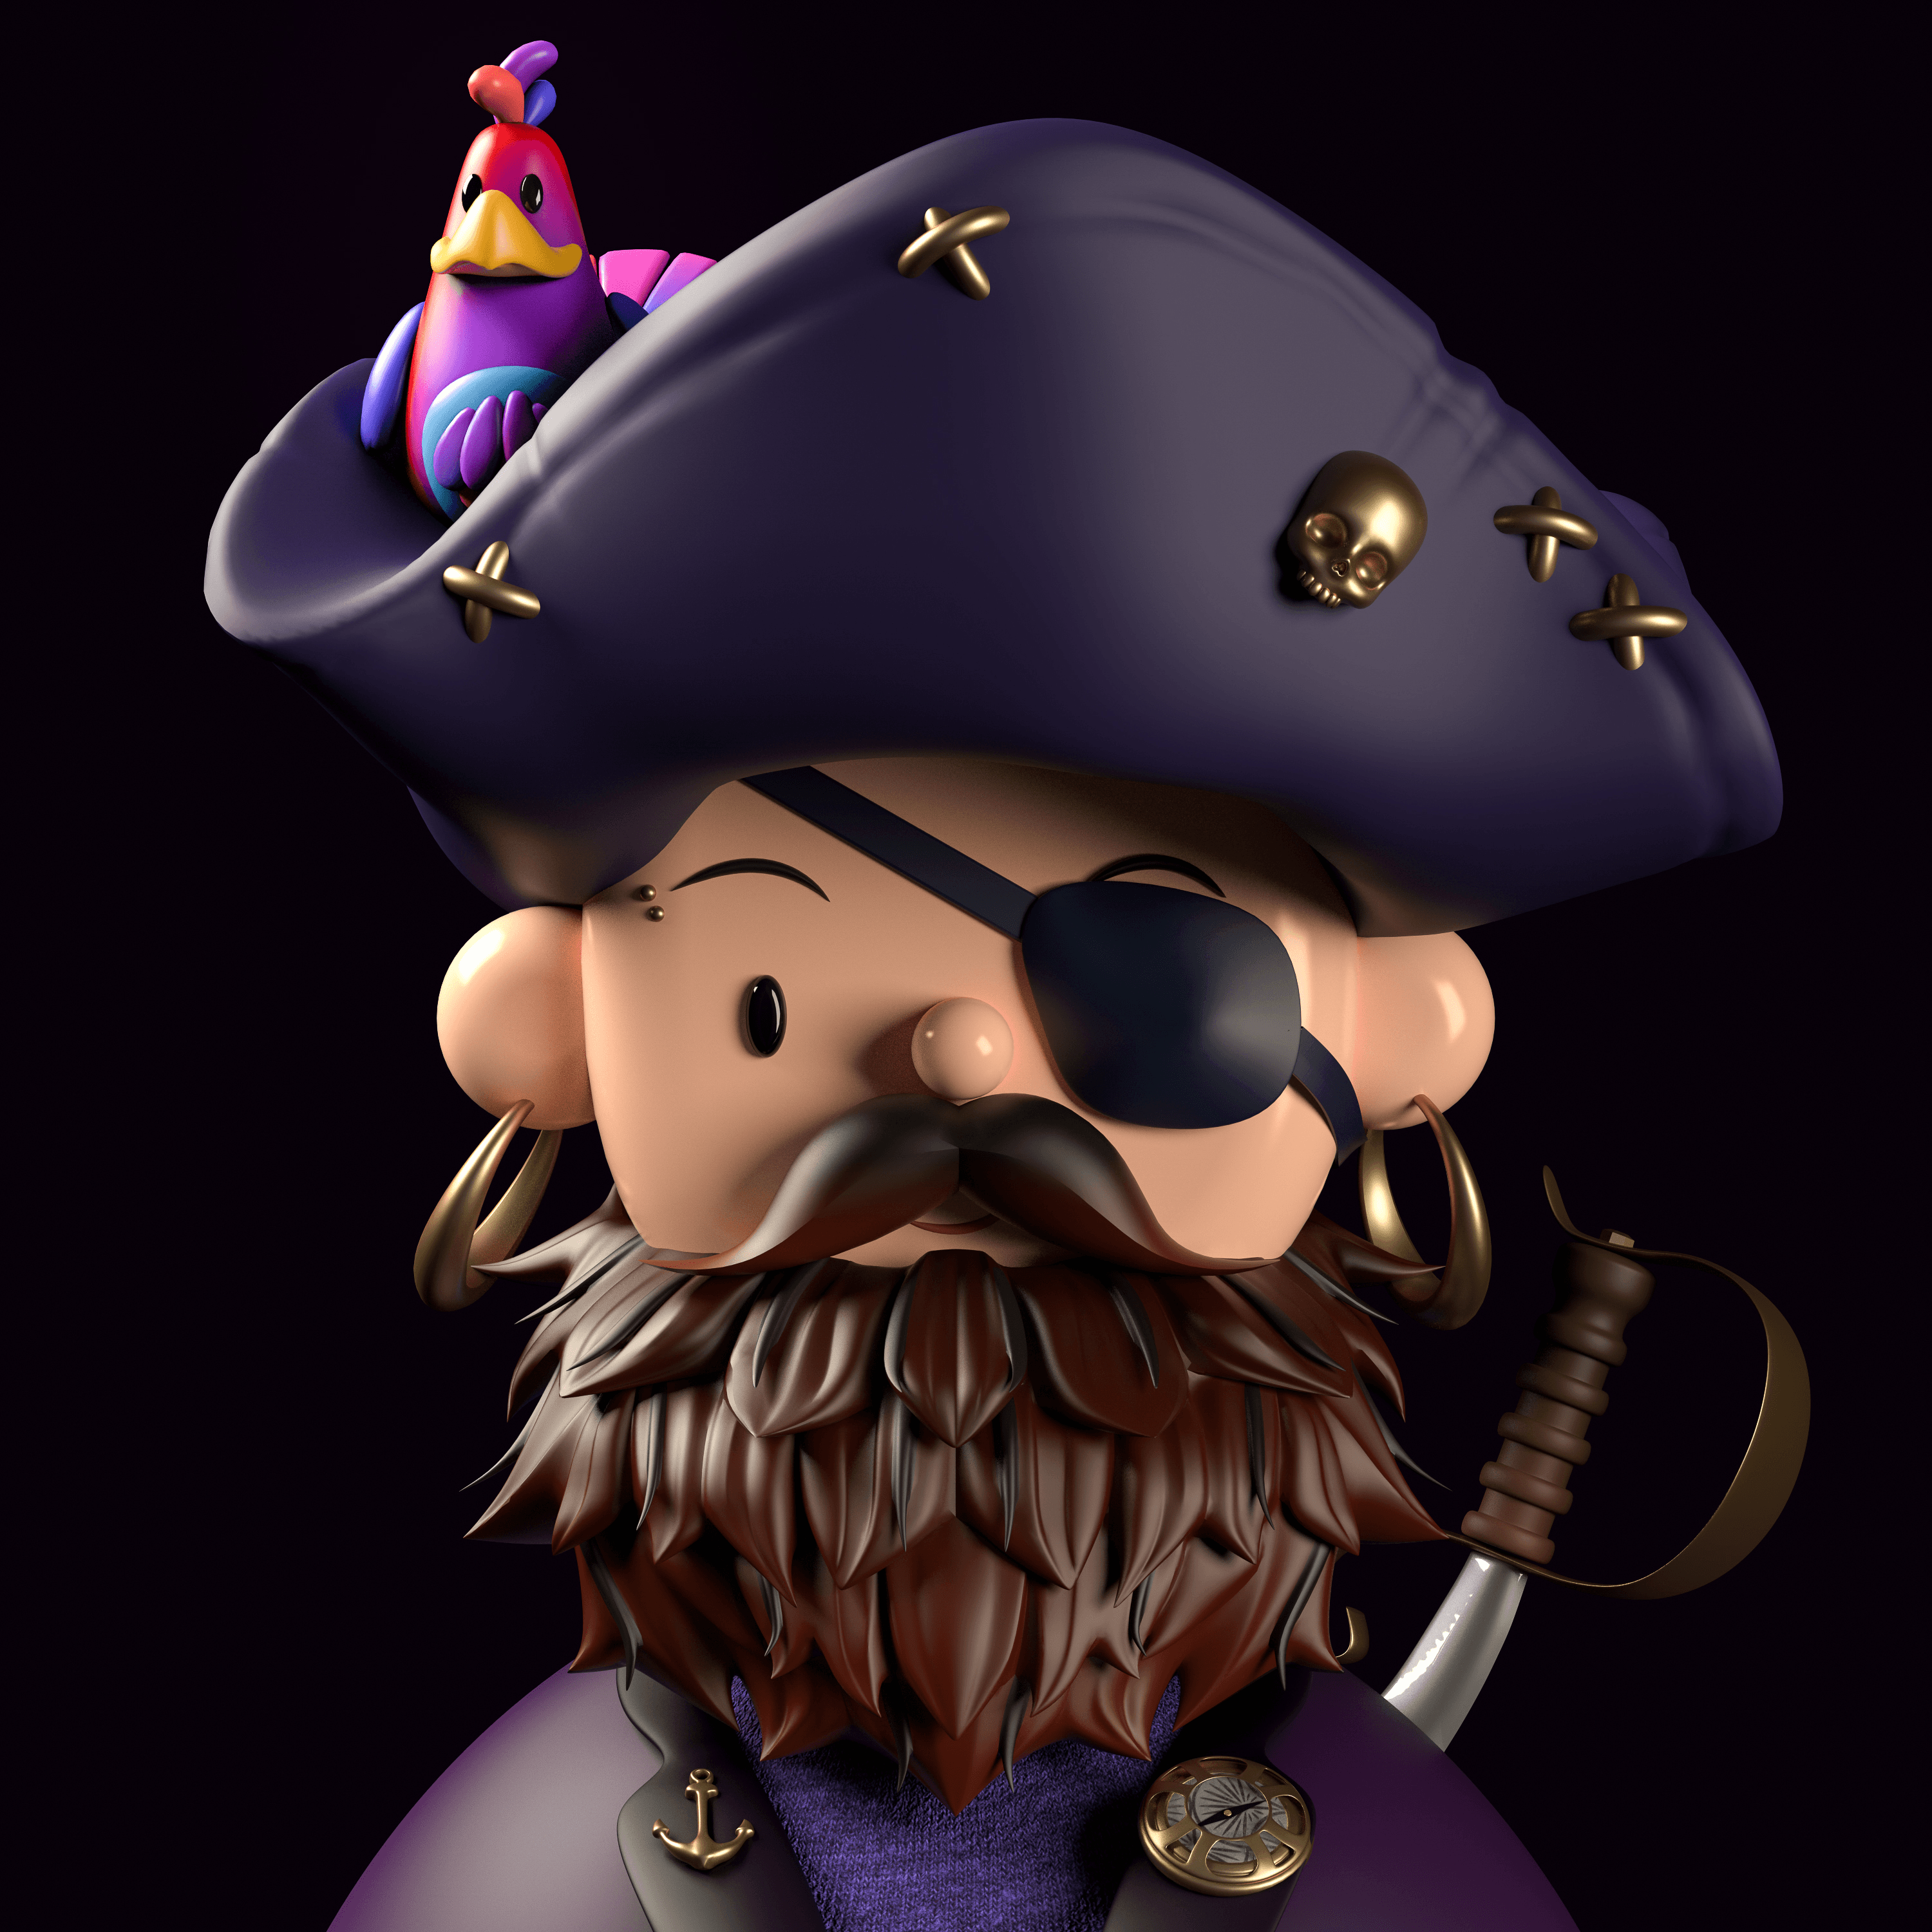 Pirate Toy Face